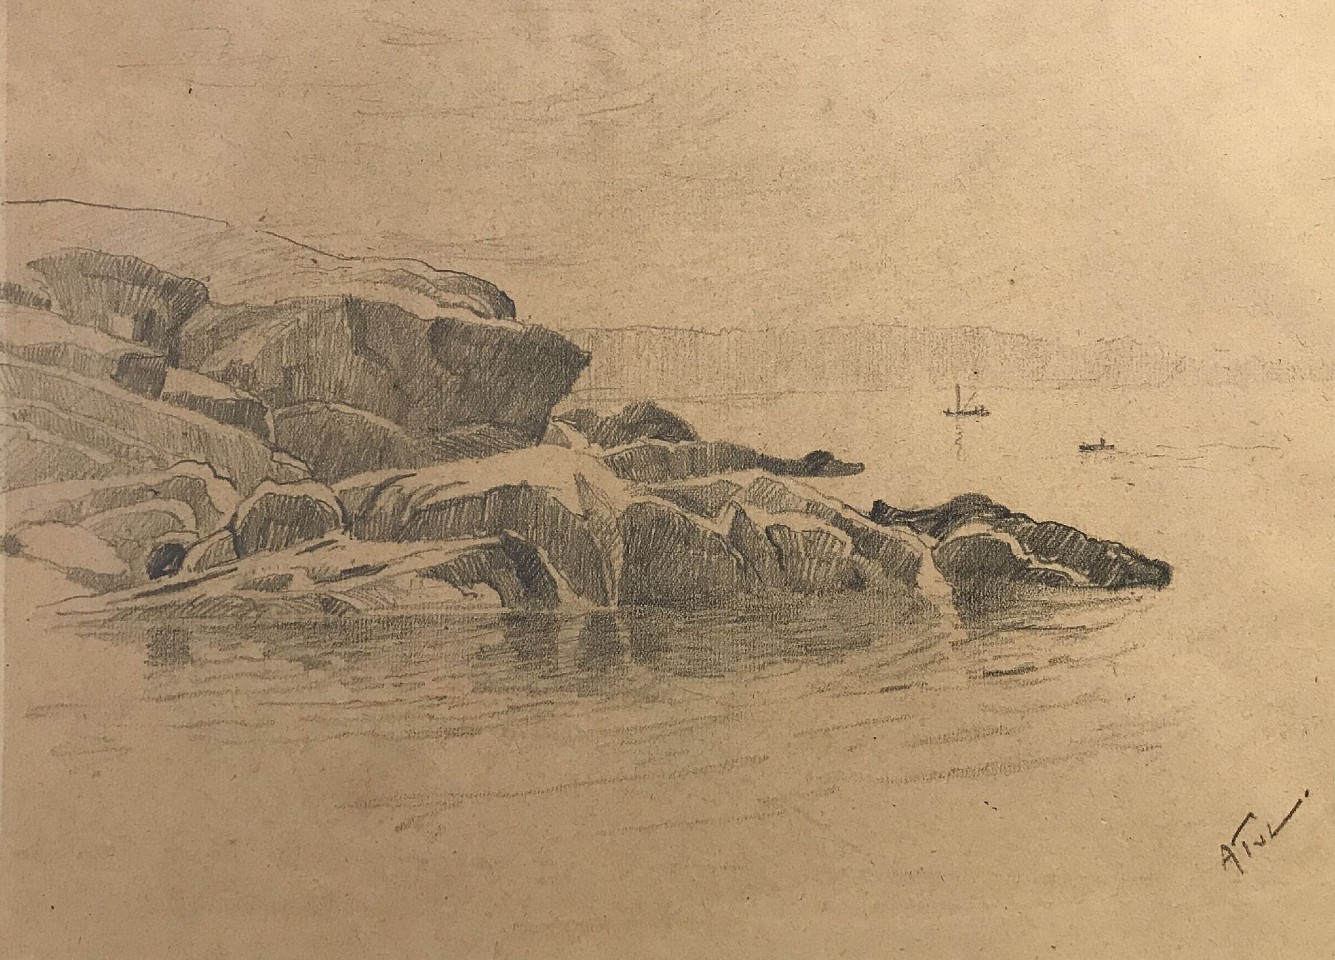 A. T. Van Laer, On the Maine Coast
pencil on paper, 8" x 11"
signed lower right
JWC 0119.47
$350